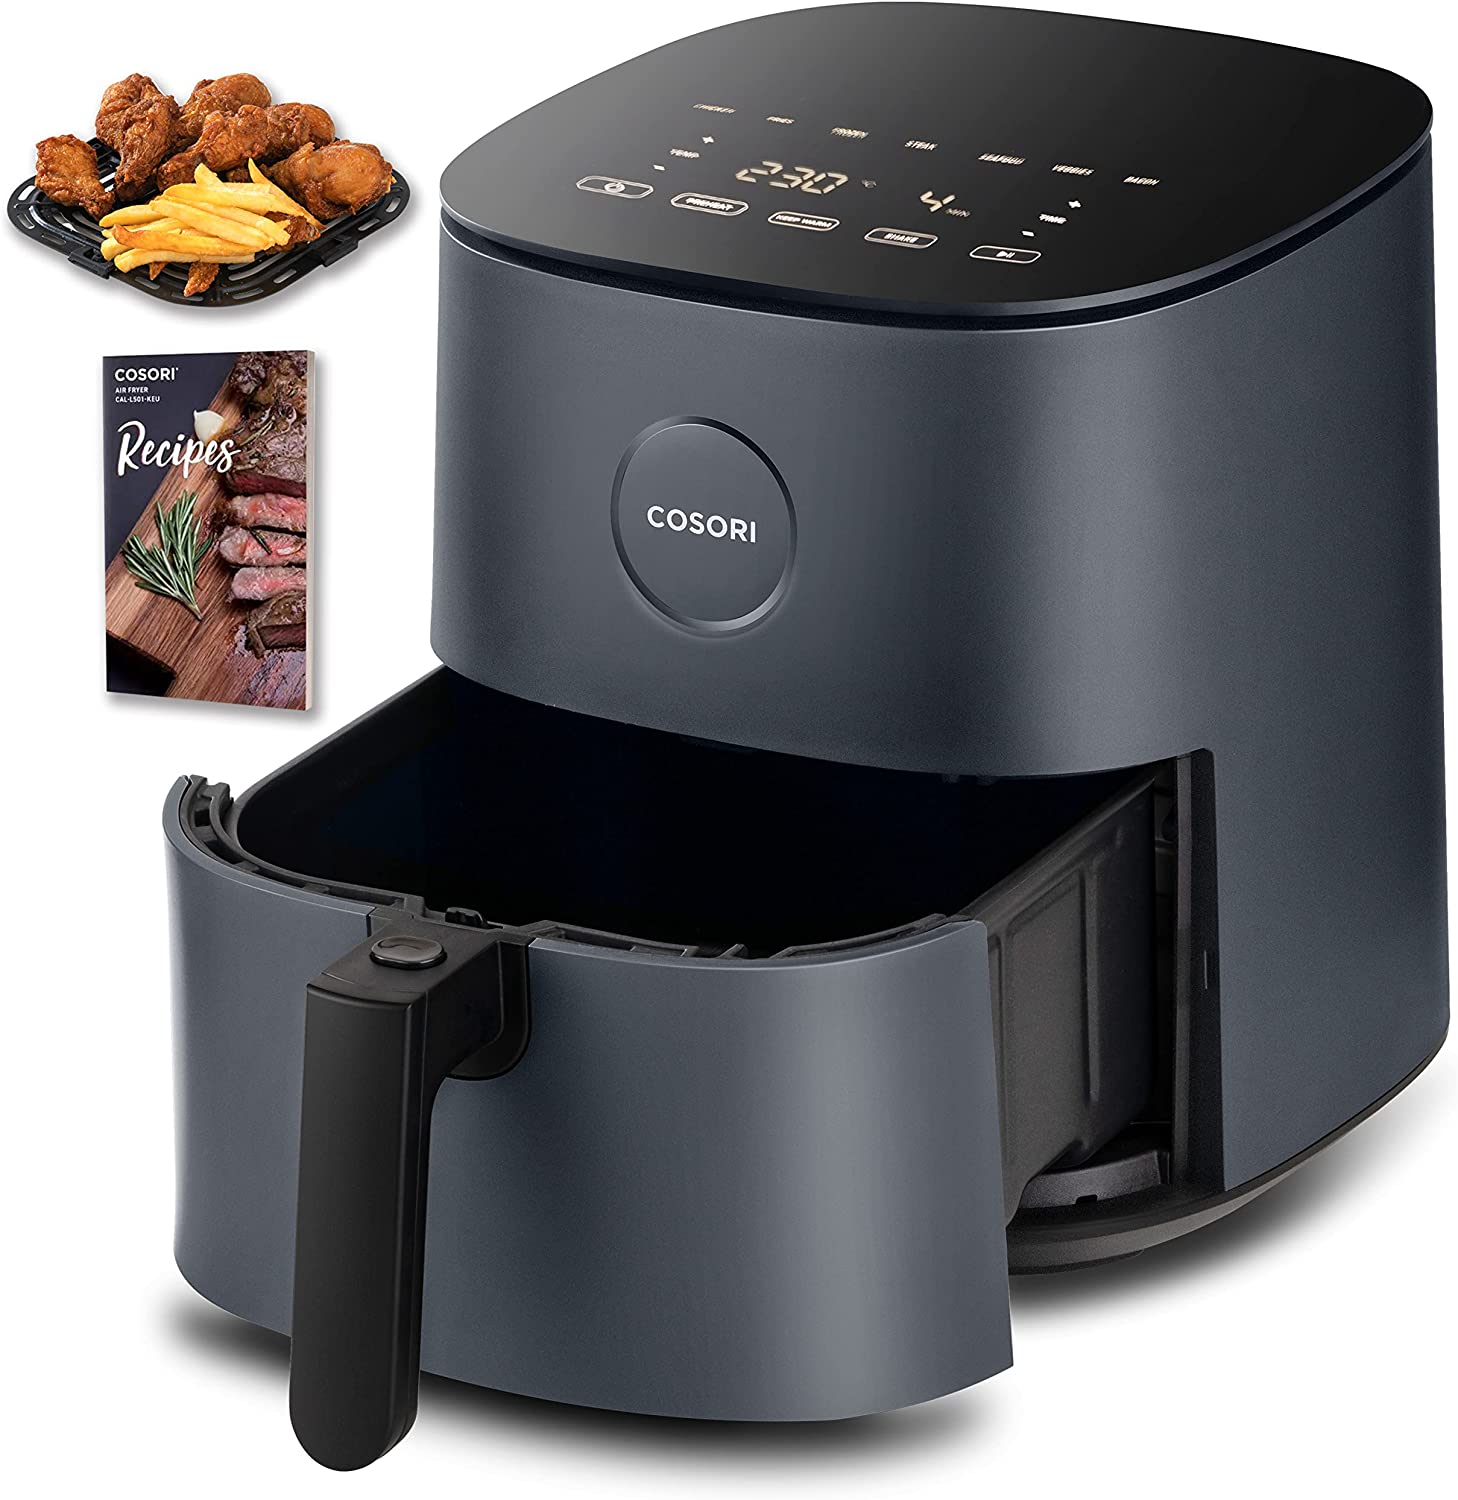 Cosori Air Fryer 4 Qt, 7 cooking functions air fryers.97% less fat